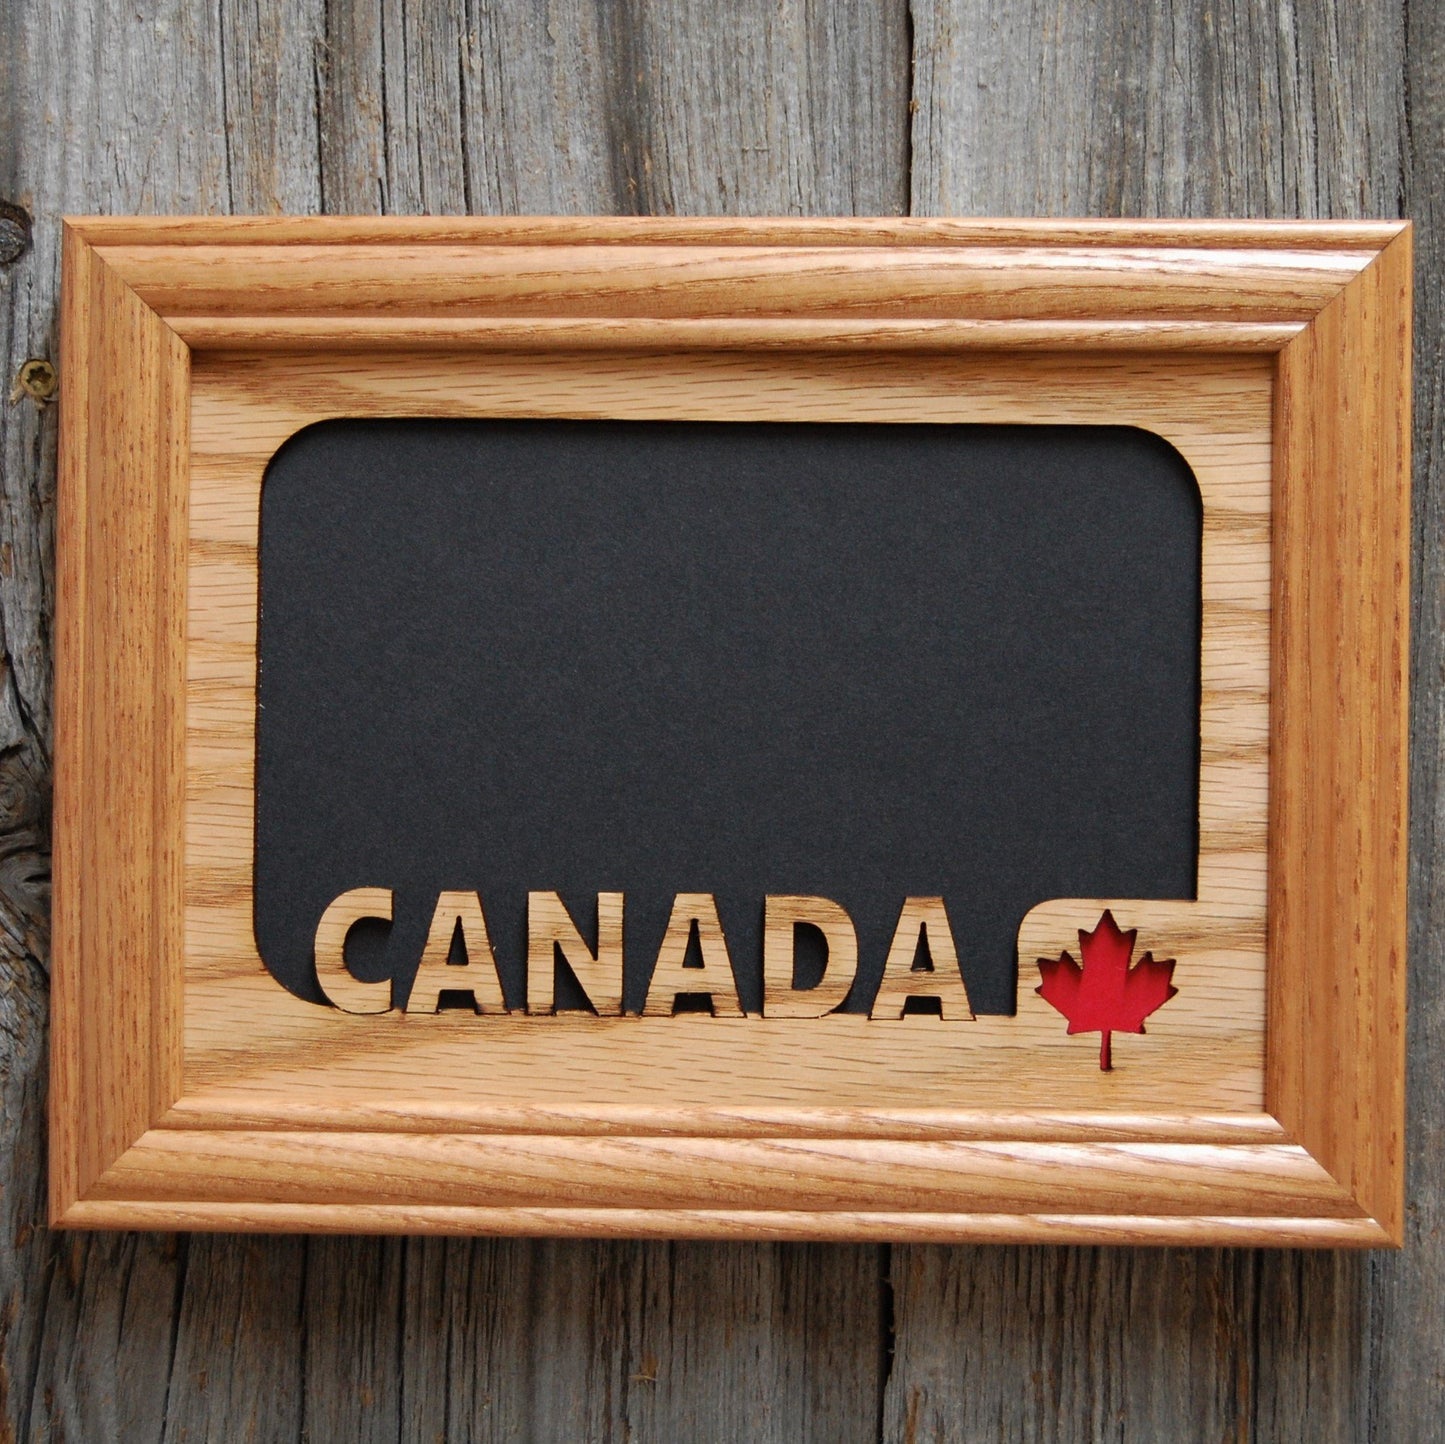 Travel Picture Frame - 5x7 Frame Holds 4x6 Photo